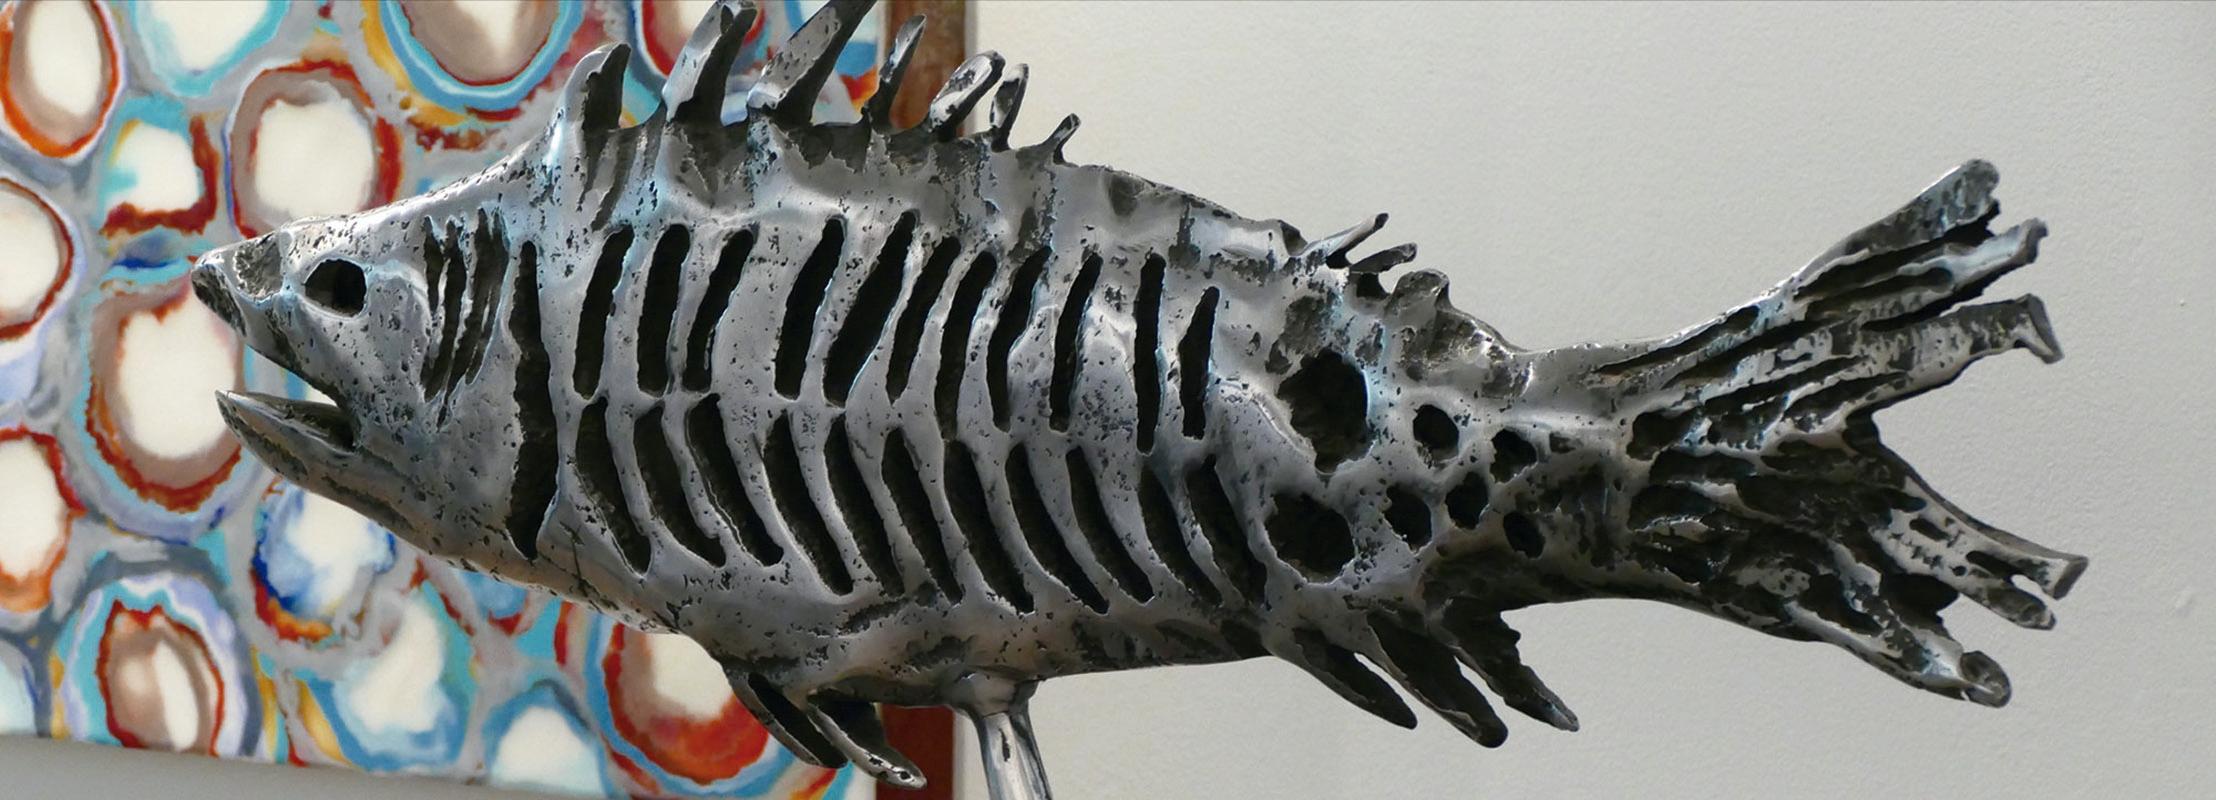 The Abstract Fish Sculpture 